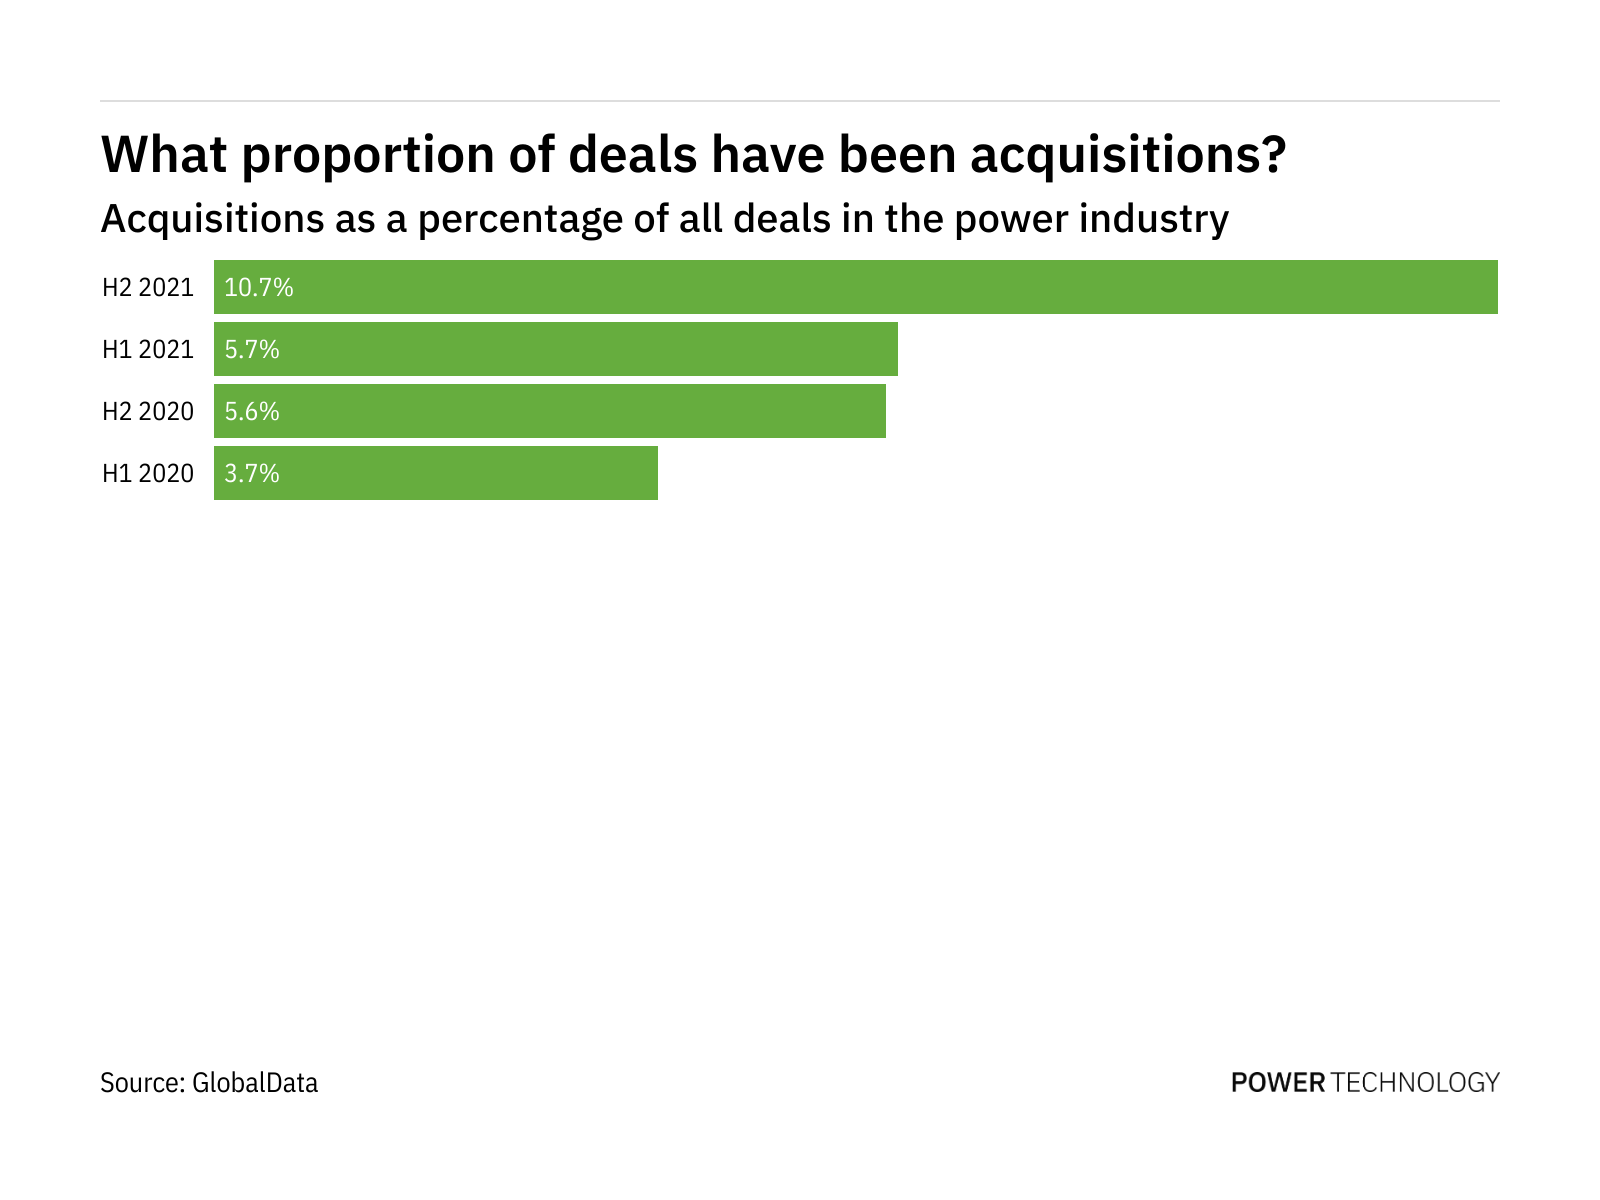 Acquisitions increased significantly in the power industry in H2 2021